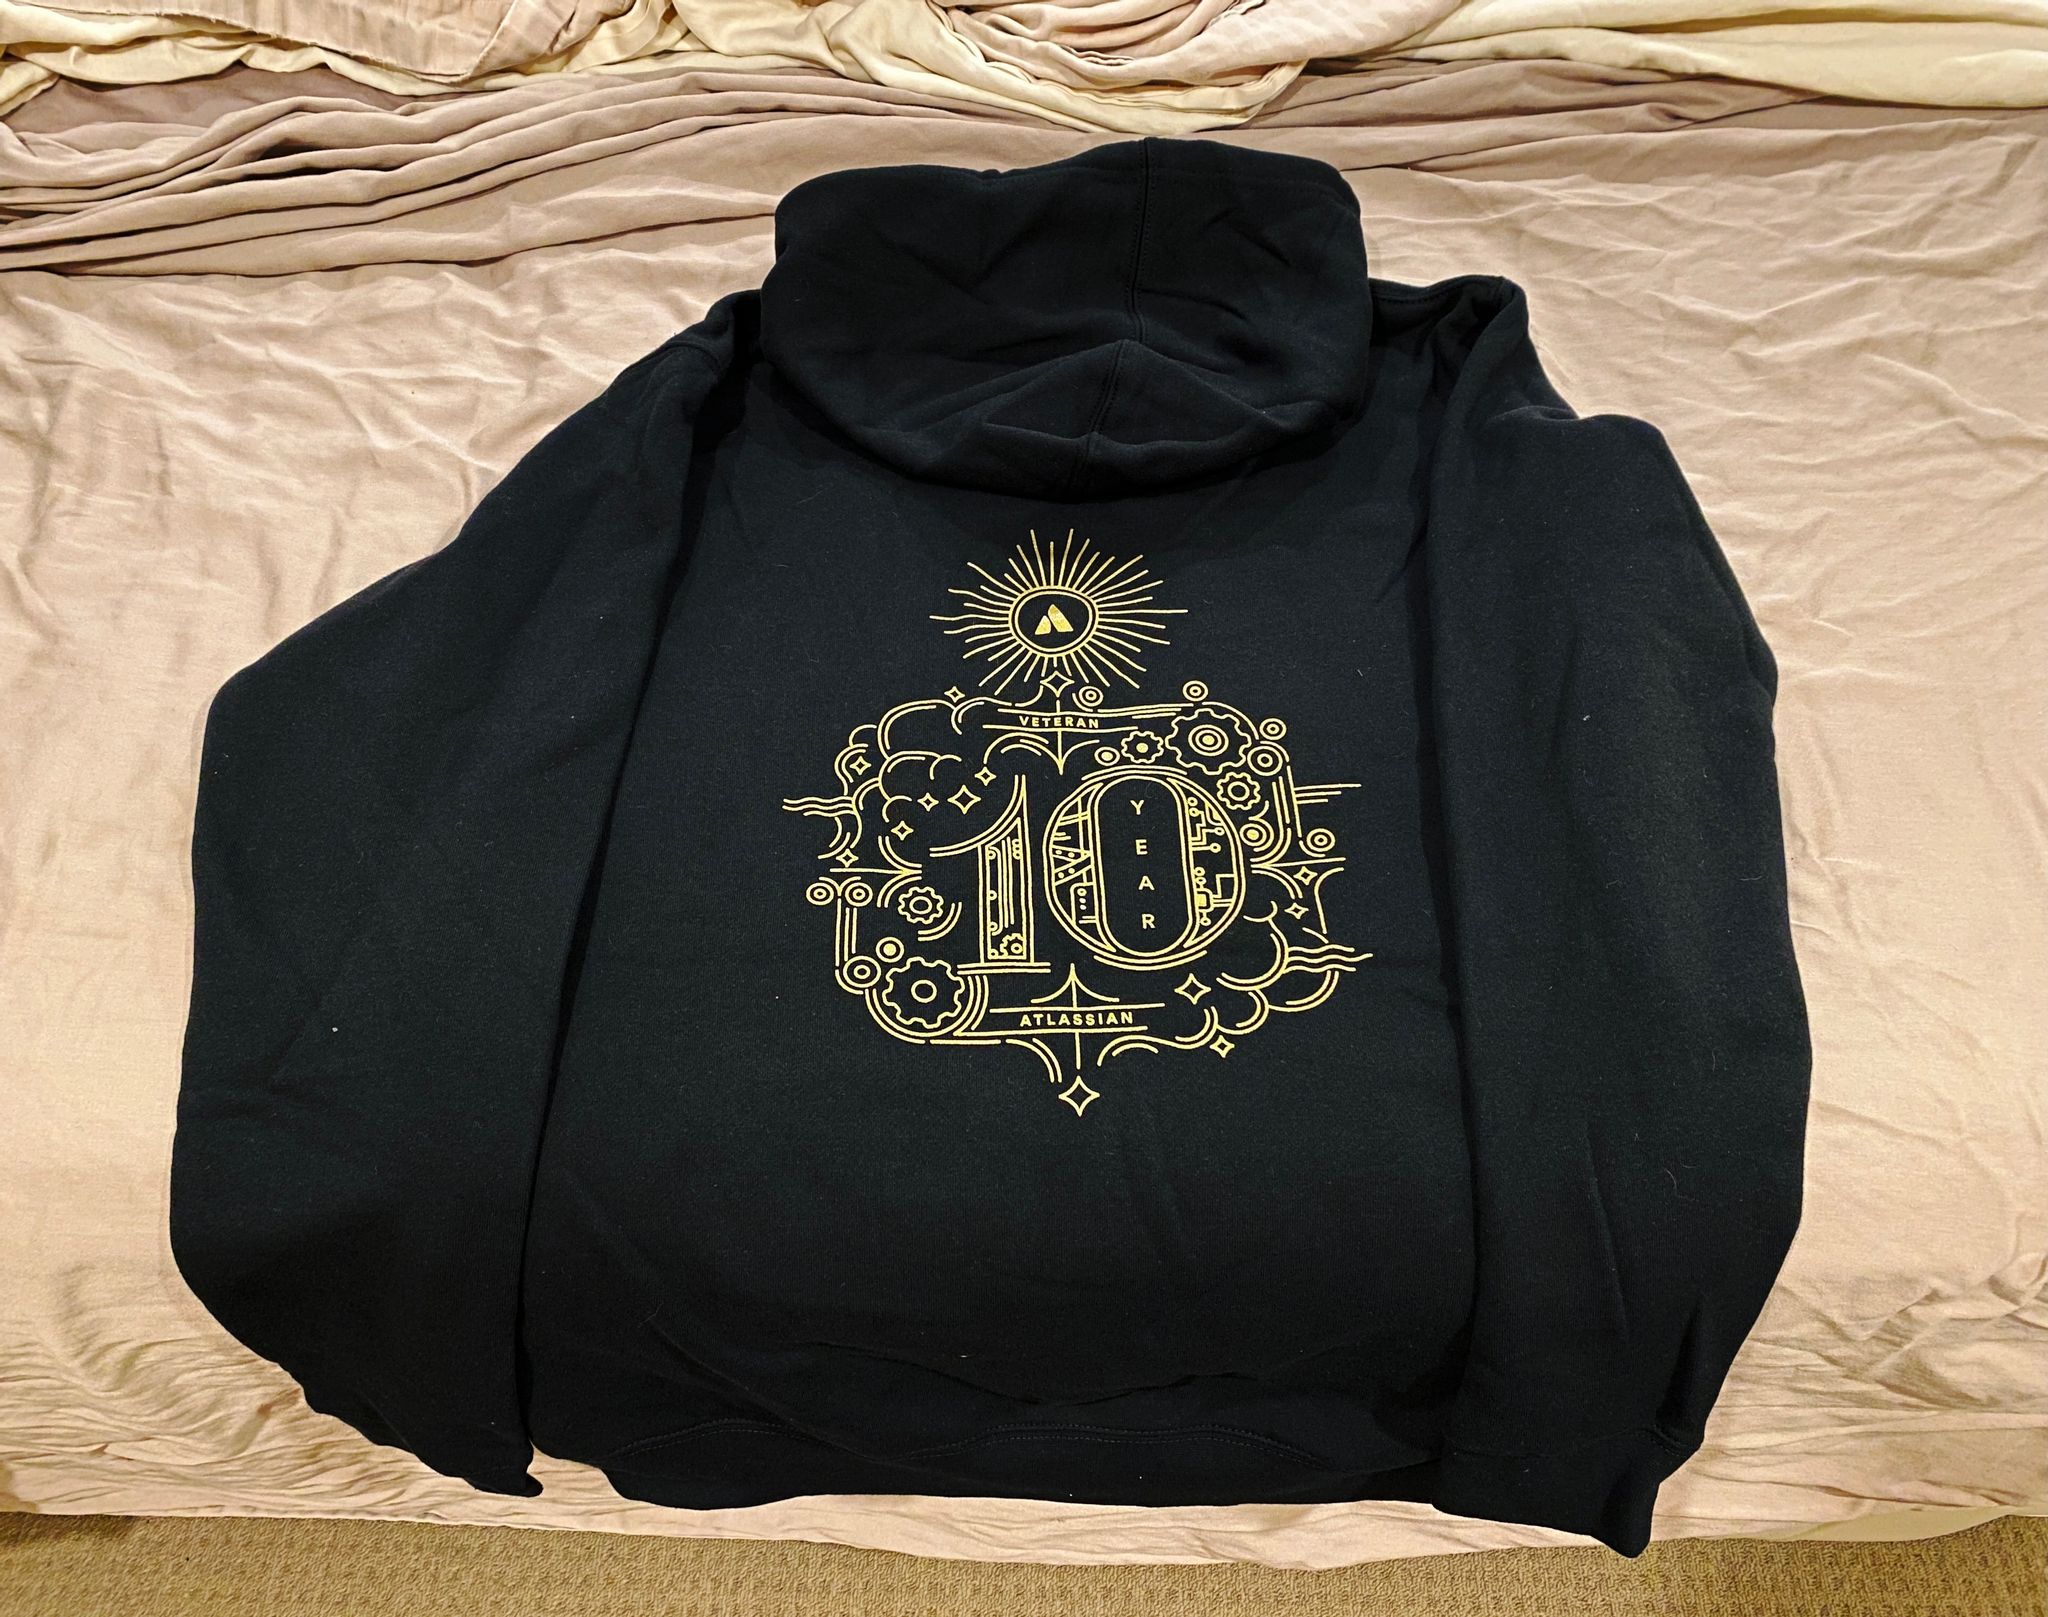 A photo of the back of a black hoodie sitting on a bed. It says "10 year" on it with clouds and cogs around it, all in a stylised outline line design in a gold colour.